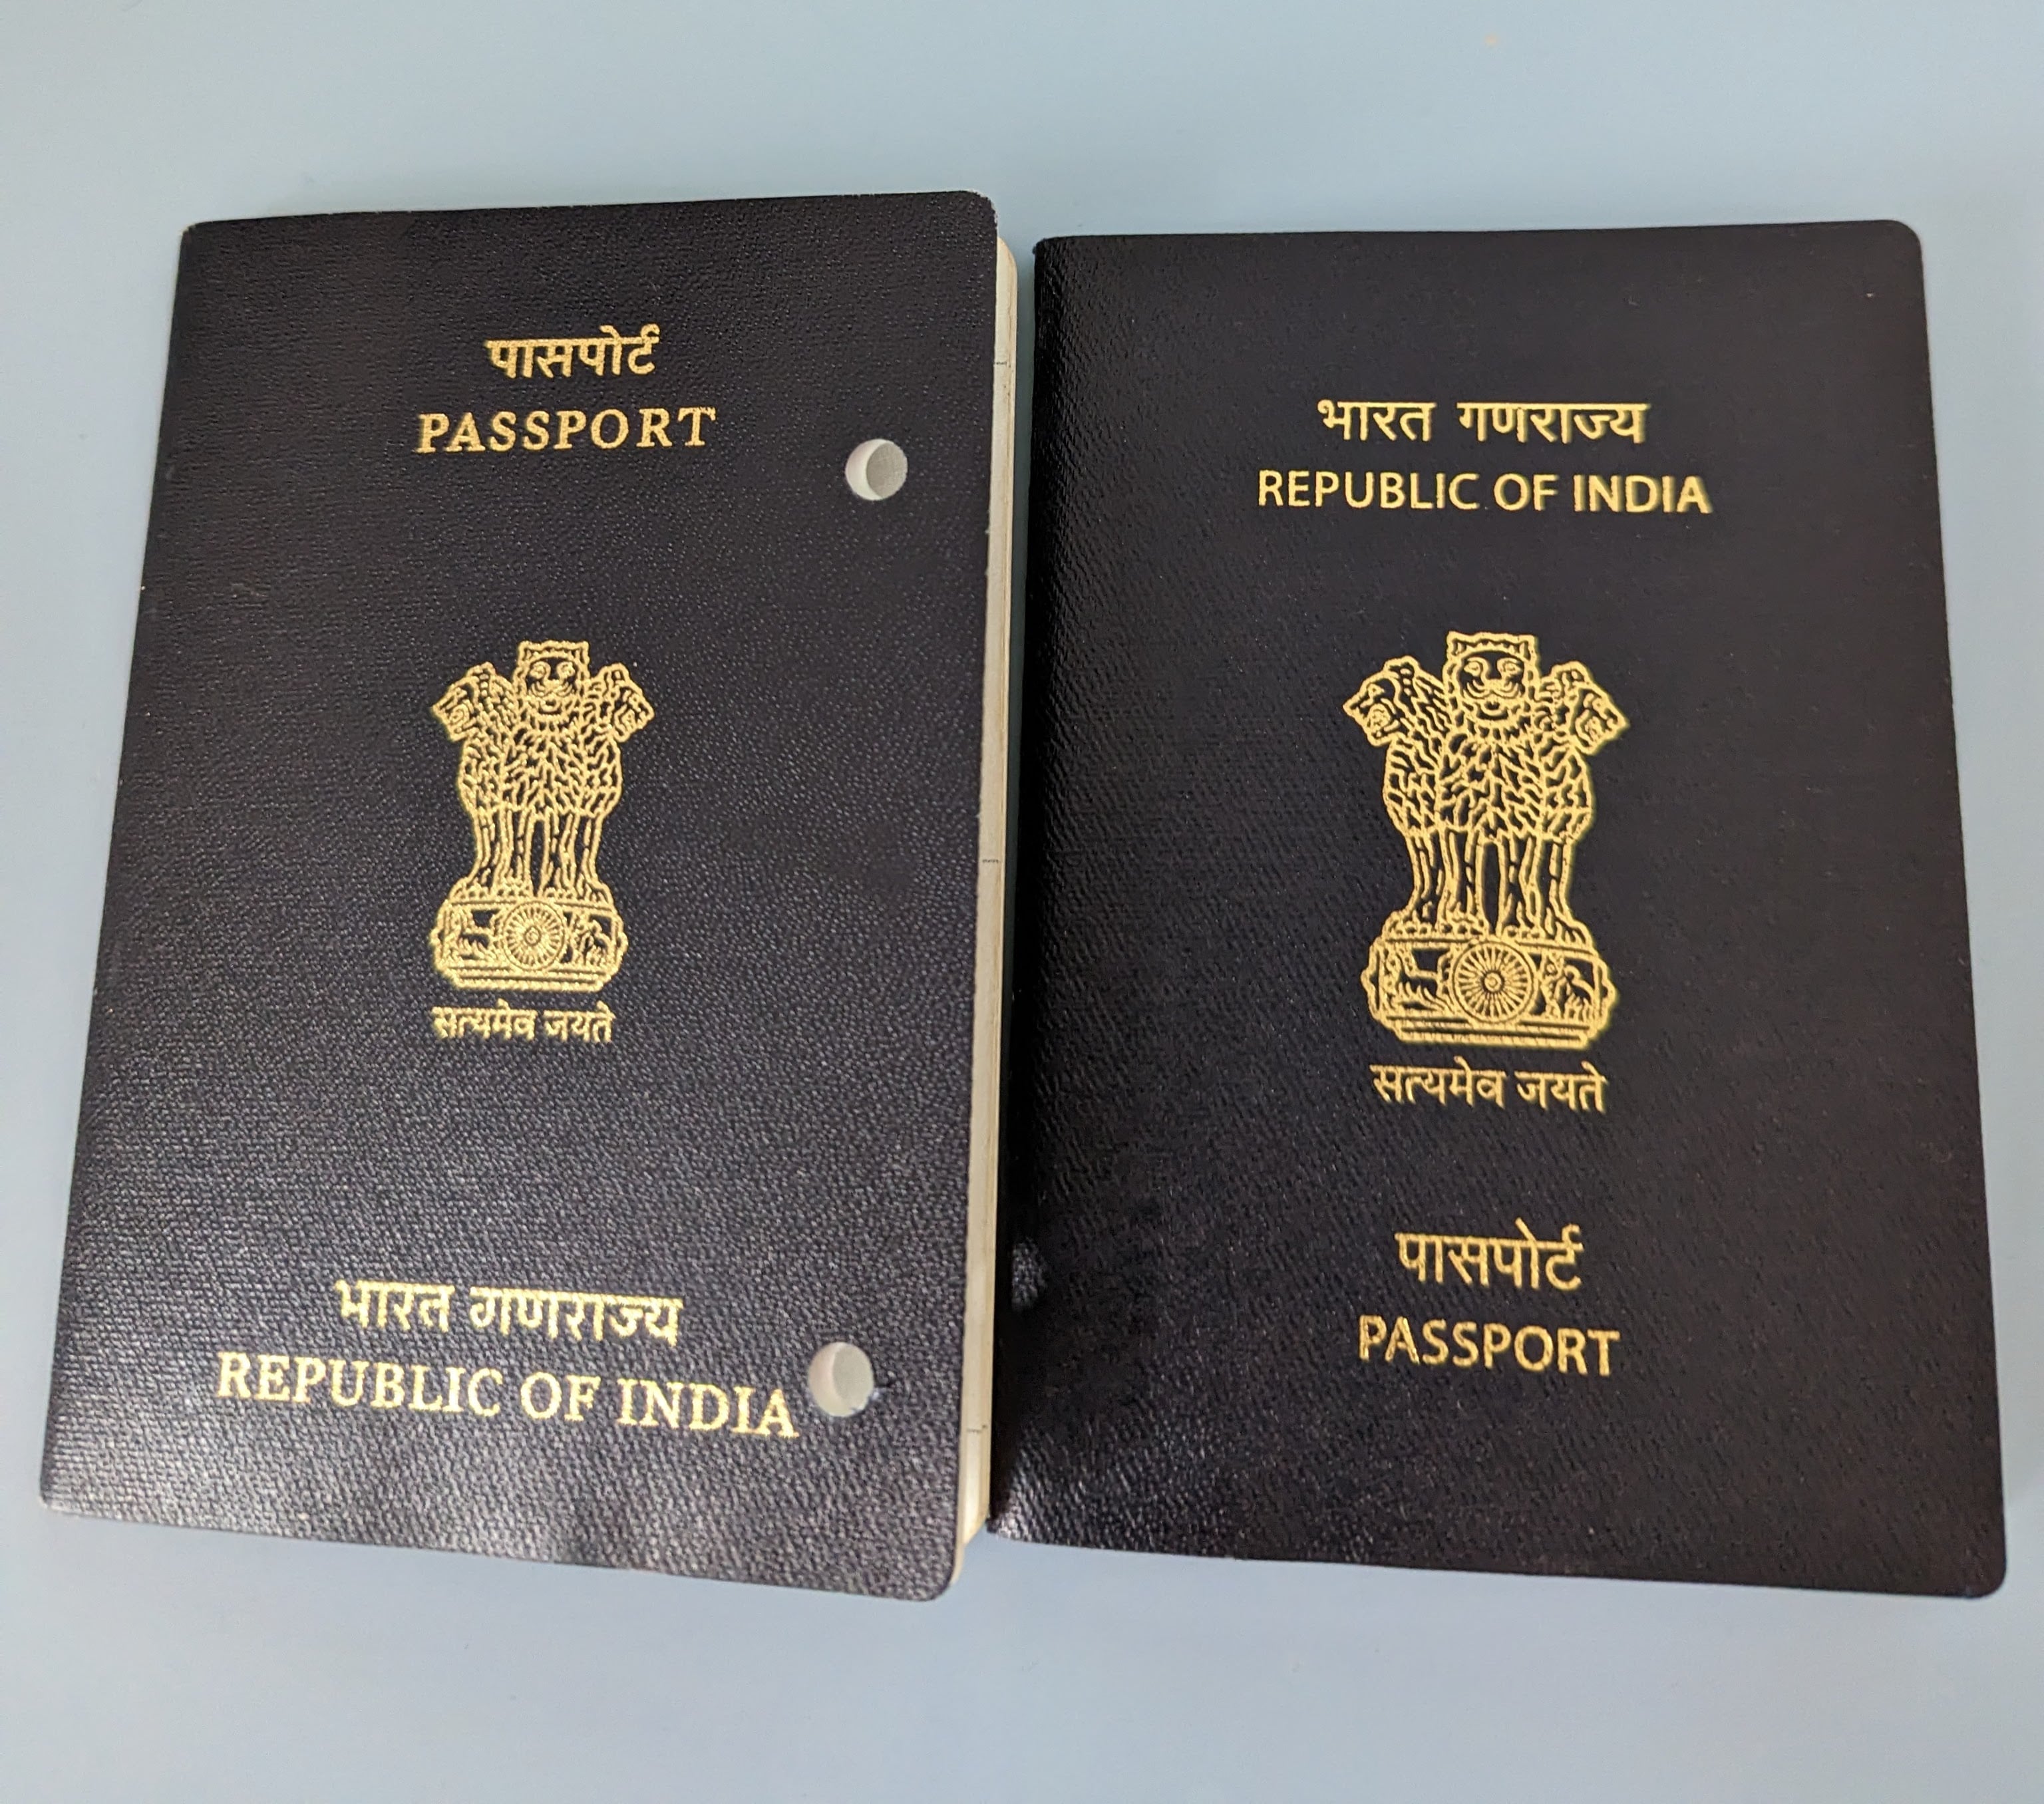 My old Indian passport on left and new one on the right